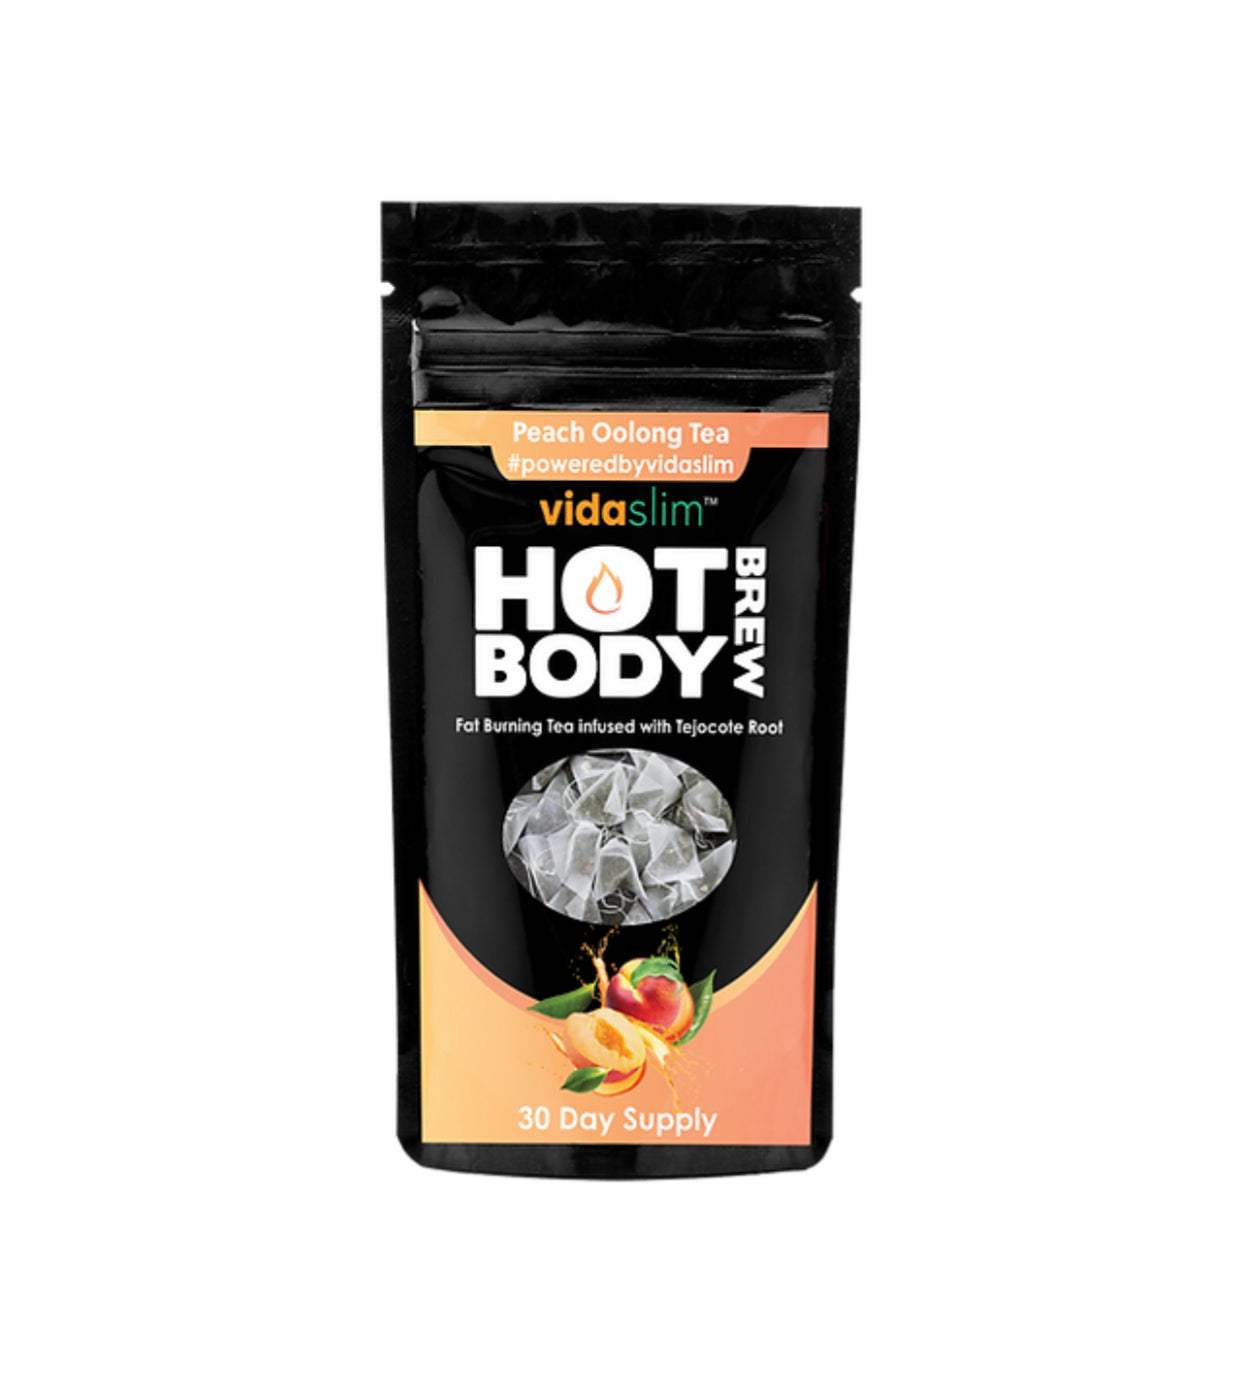 30 day Hot Body Brew Infused with Tejocote Root PEACH